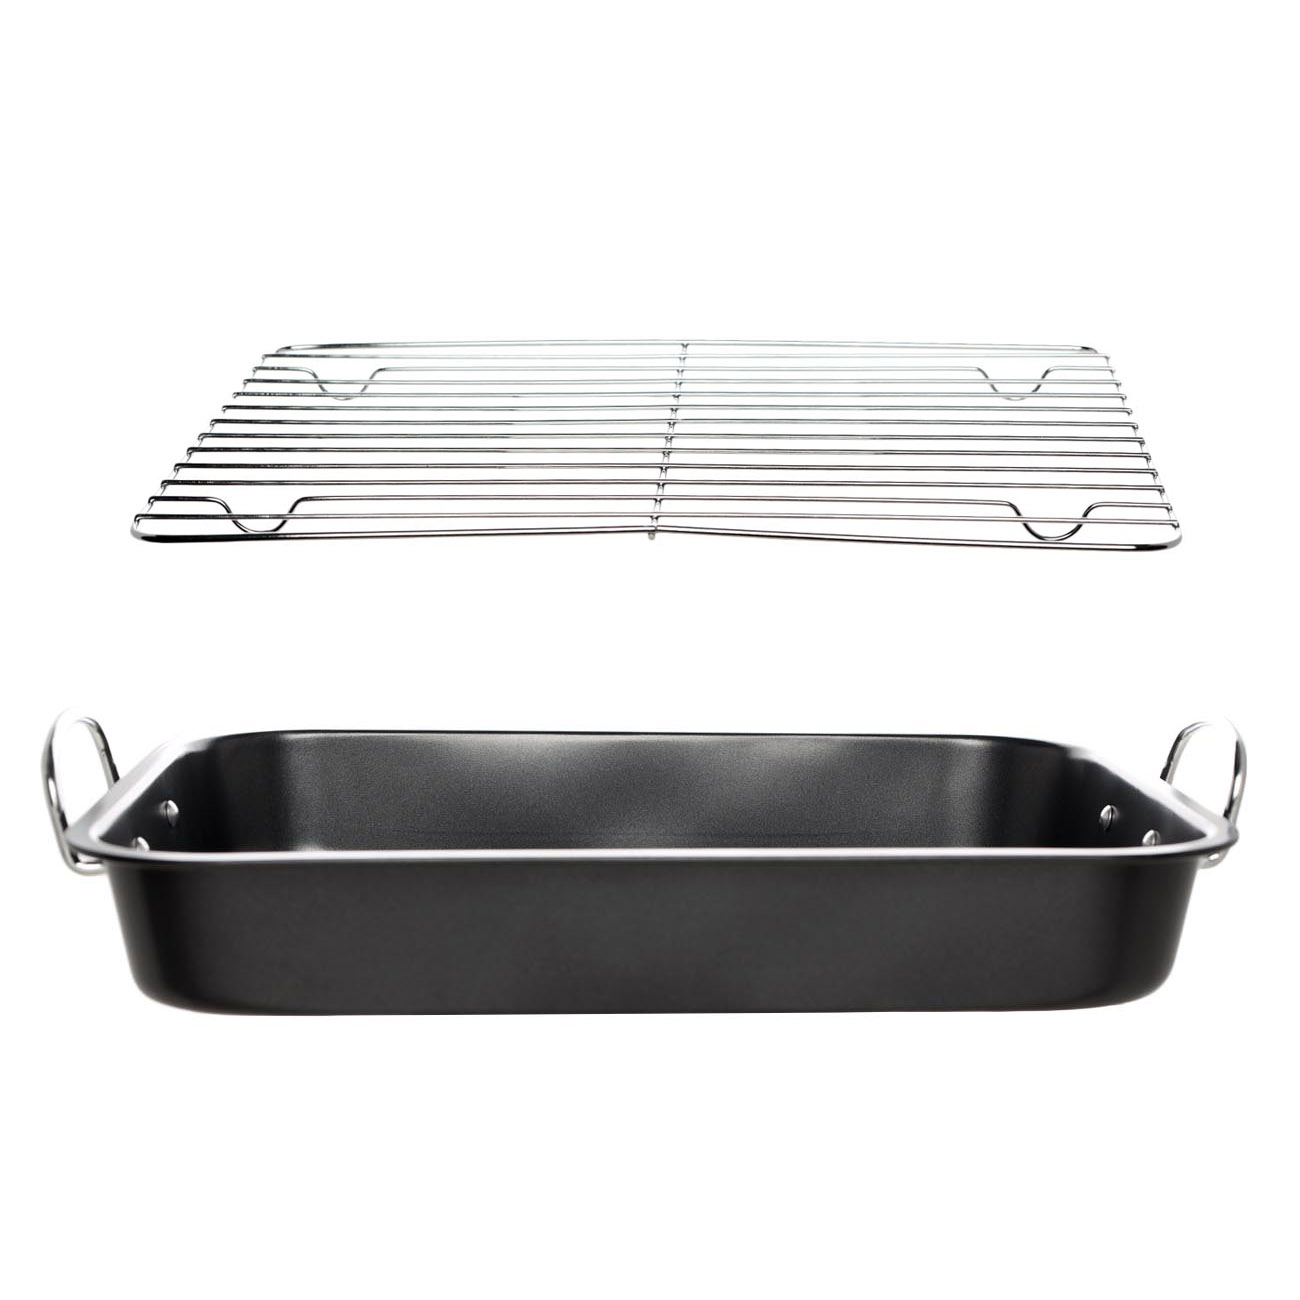 Baking tray, 37x29 cm, with handles and grill, coated, steel, black, BBQ изображение № 5